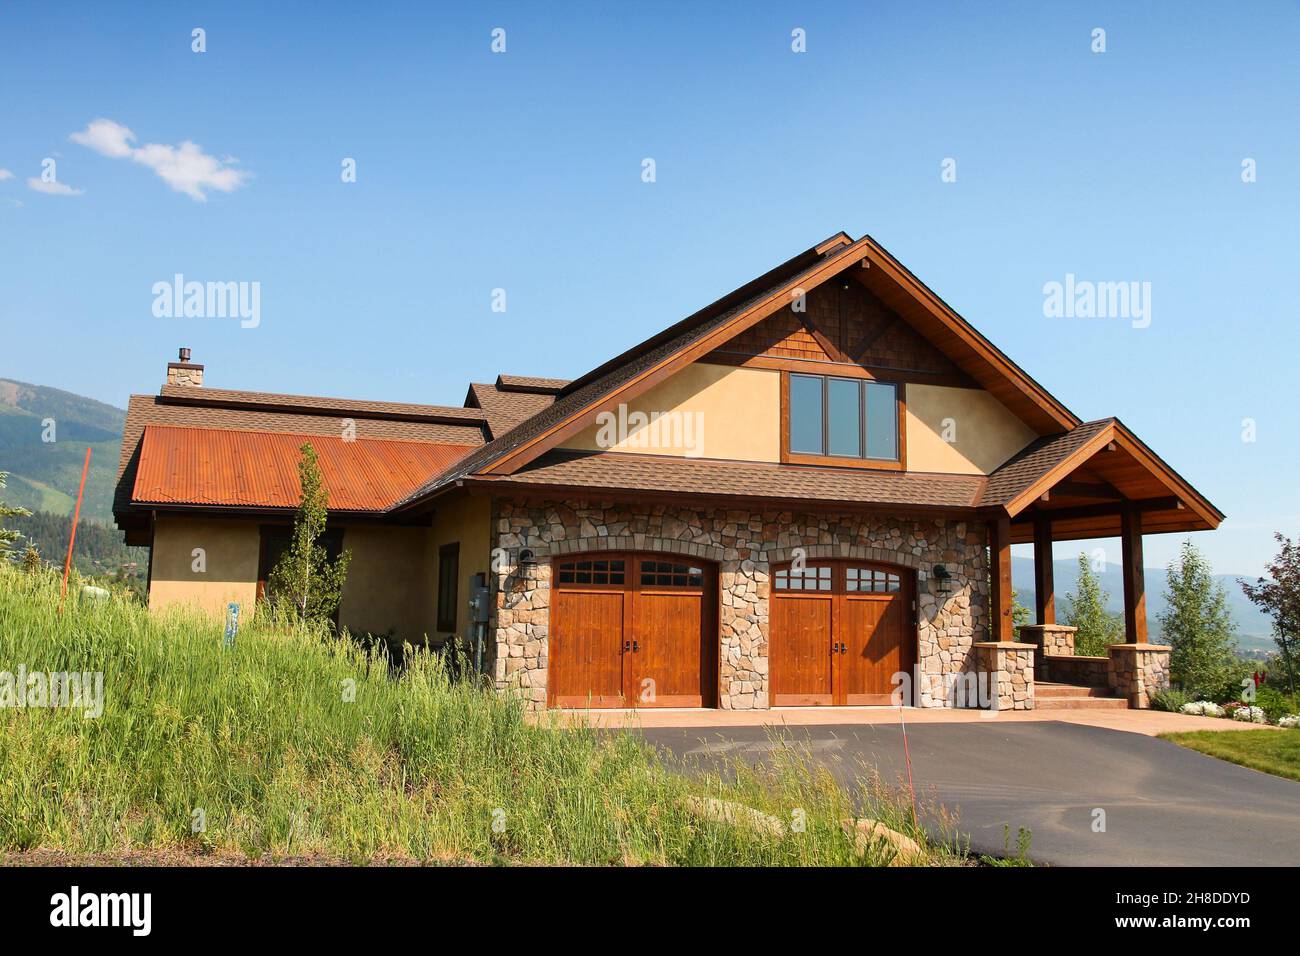 STEAMBOAT SPRINGS, COLORADO - JUNE 19, 2013: Generic house seen from public road in Steamboat Springs, Colorado. Over 5 million homes are sold annuall Stock Photo